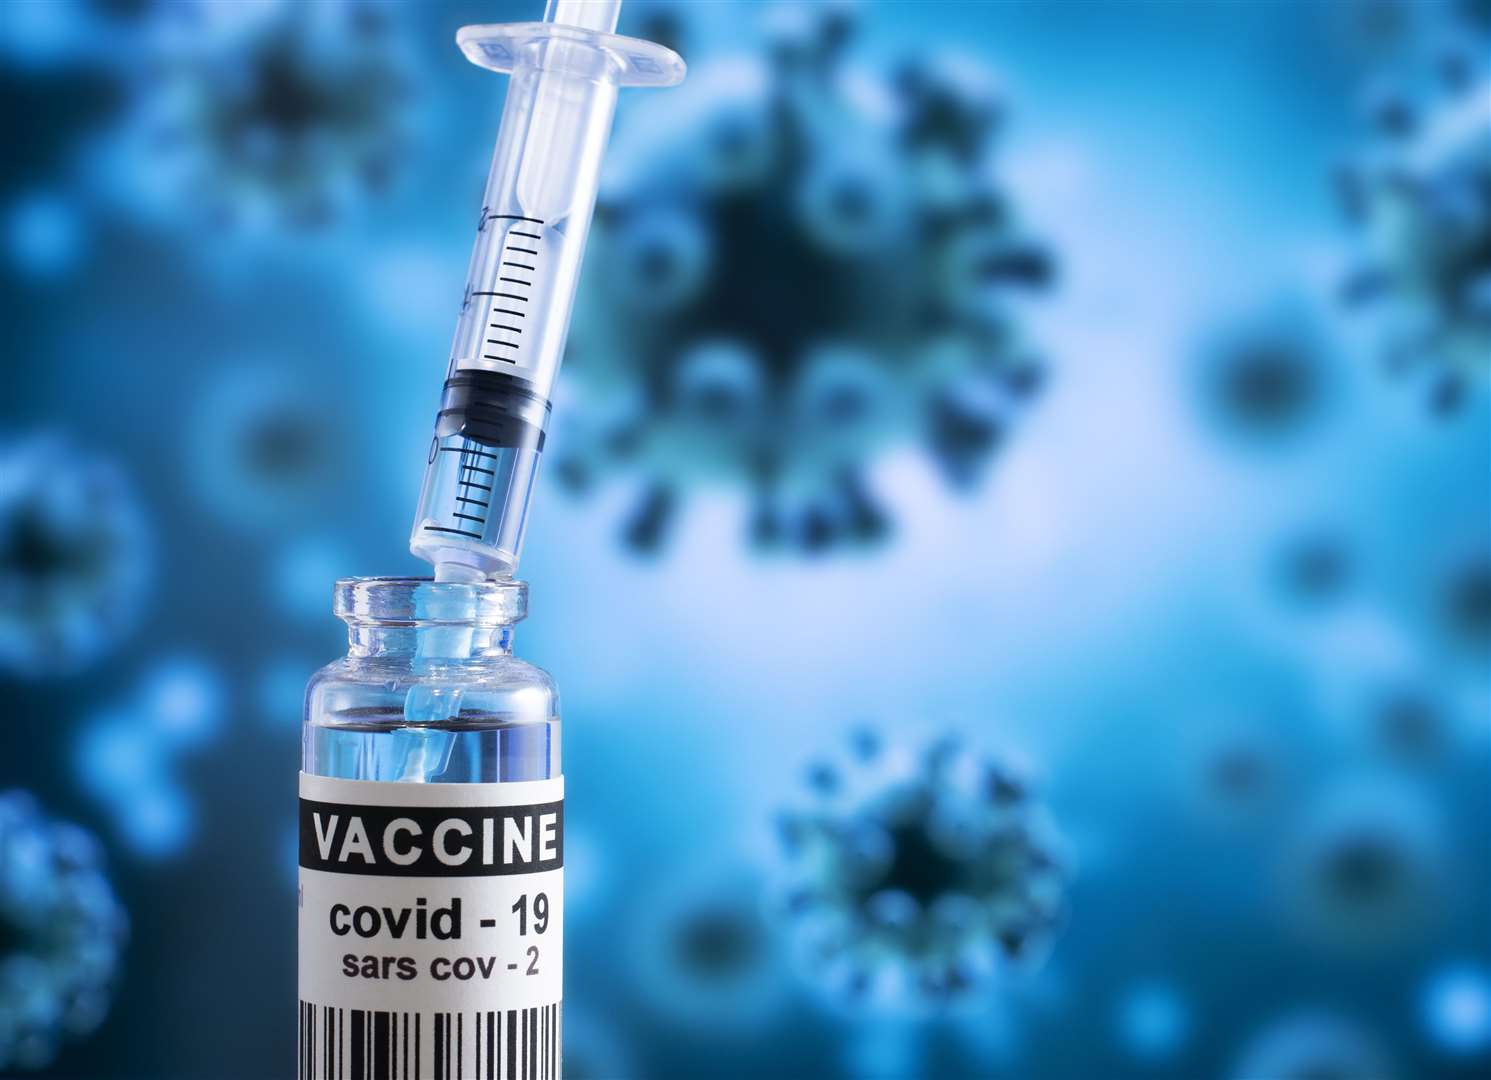 Those aged 65-69 are now being invited to have the vaccine